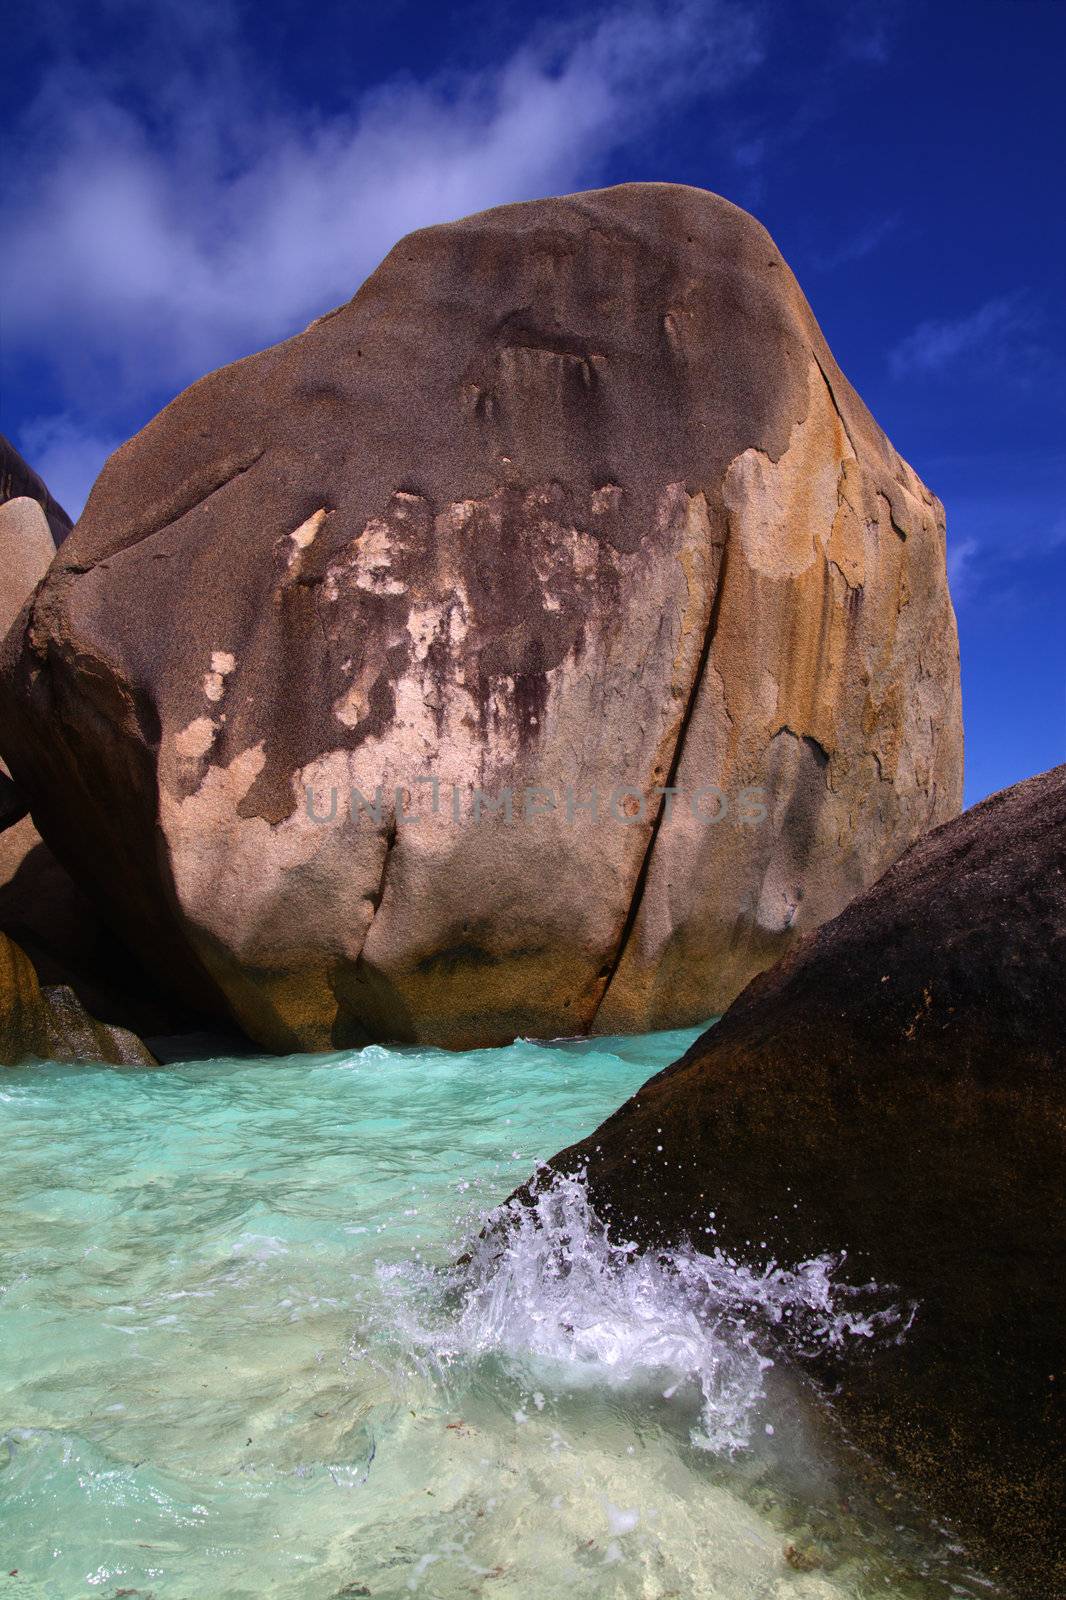 Clear tropical ocean water around large rocks on an island shore